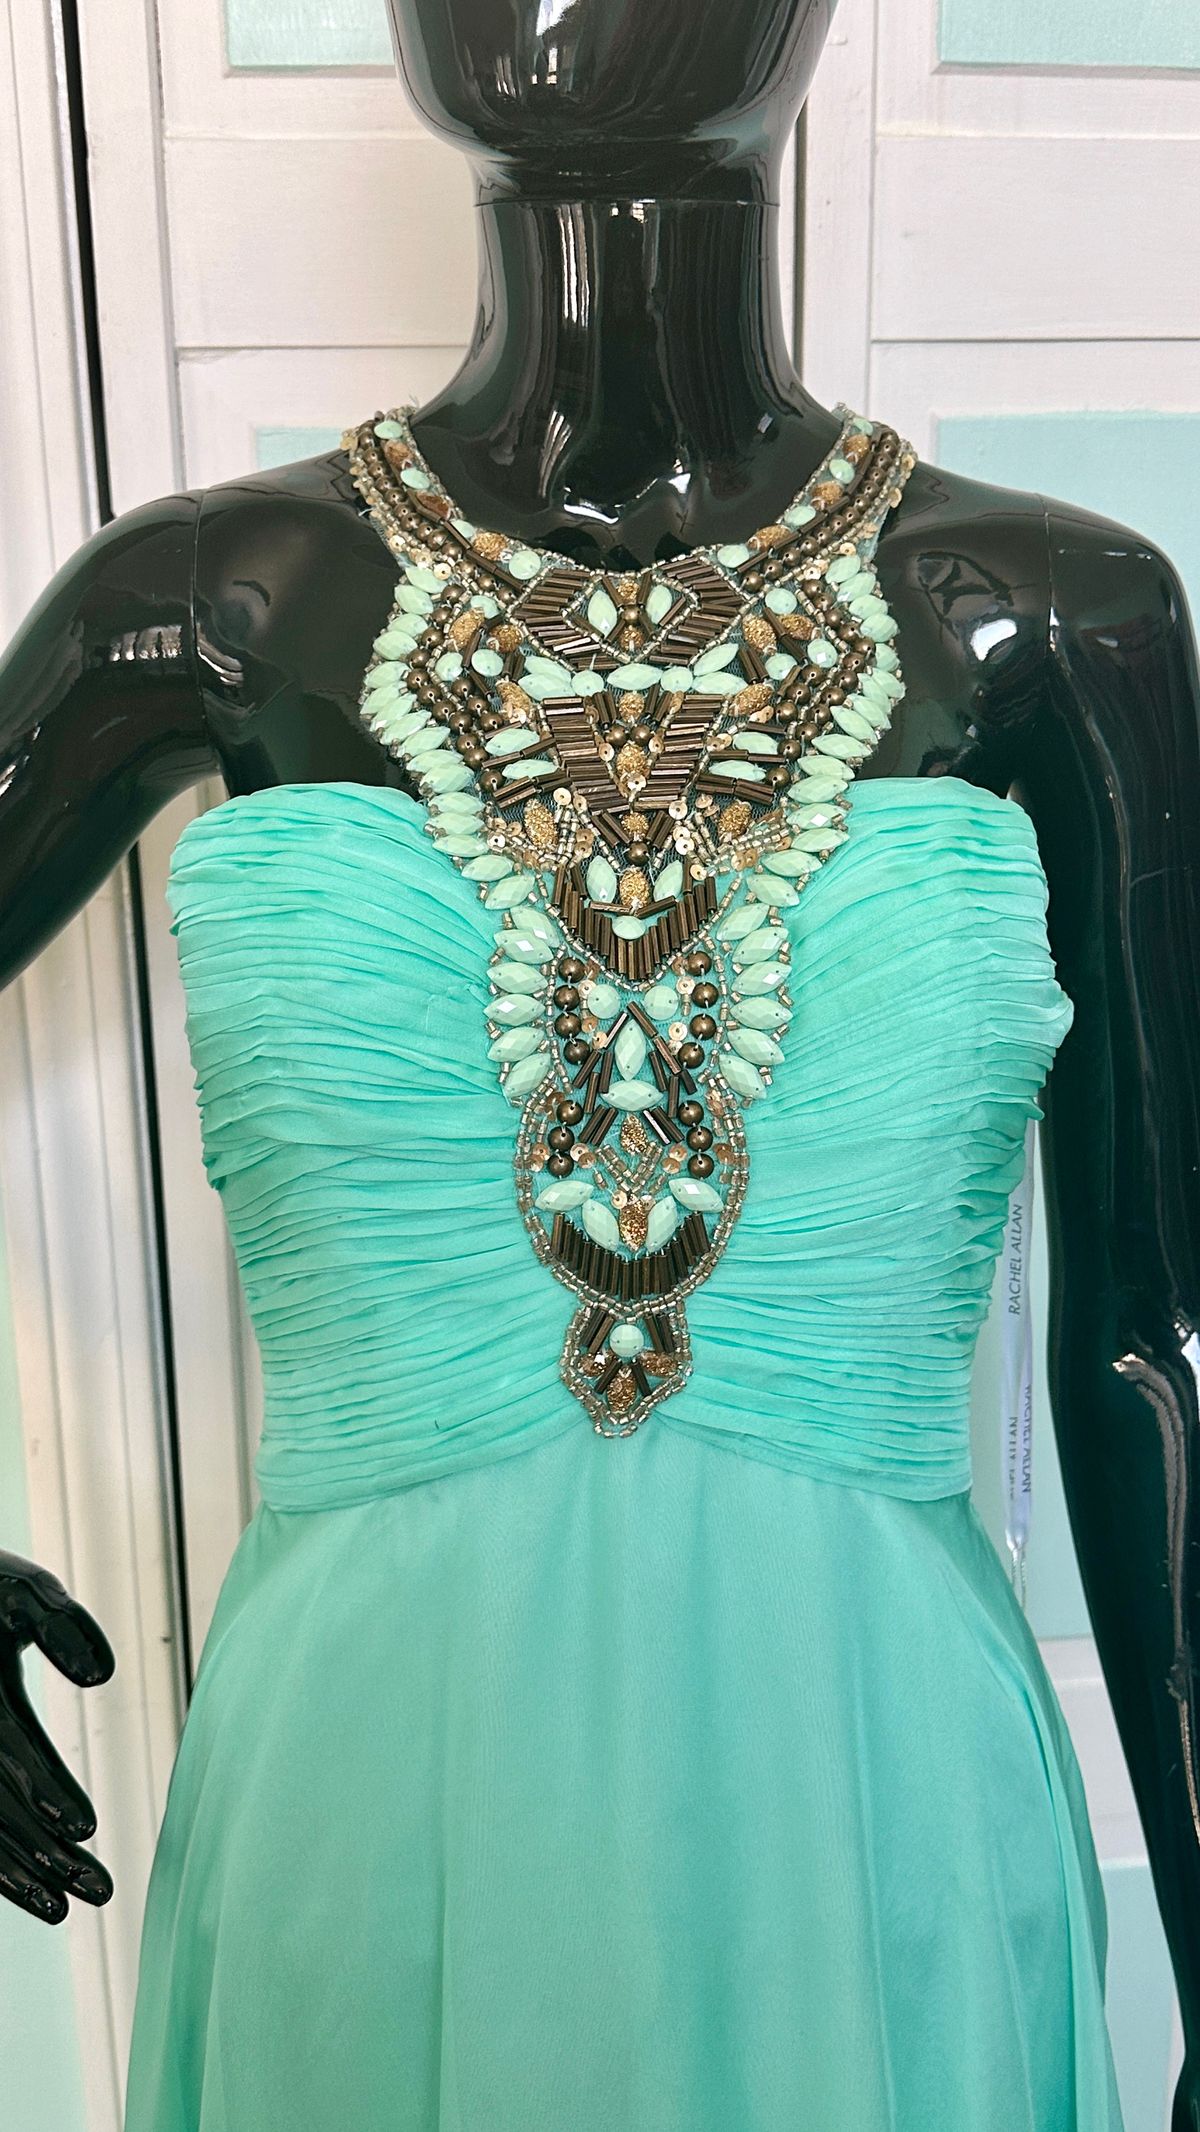 Style 7197 Rachel Allan Size 4 Prom High Neck Sequined Light Green A-line Dress on Queenly